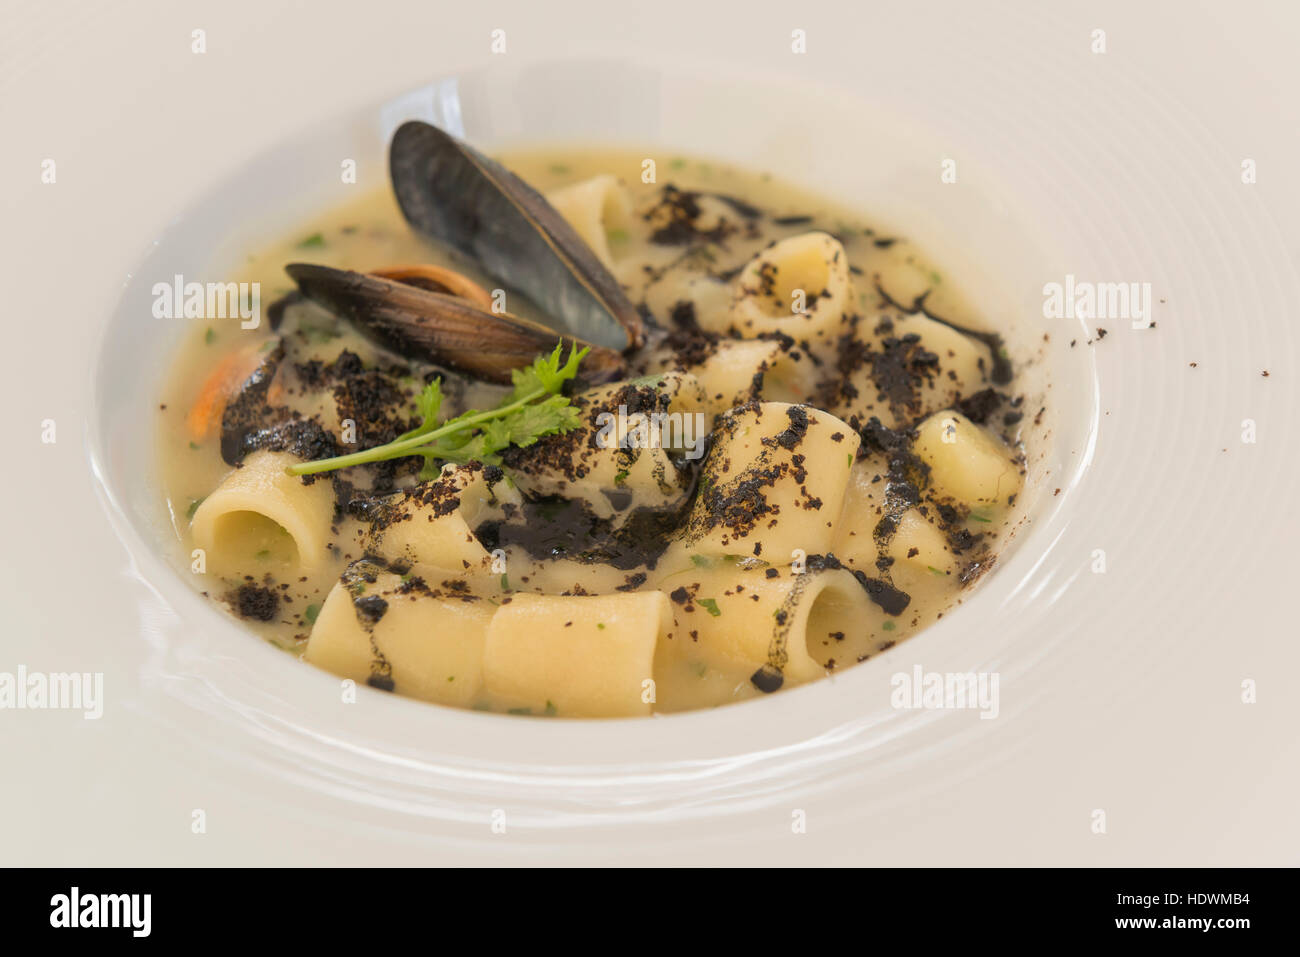 Fish dish with mussels and black of cuttlefish, typical italian food of Mediterranean diet, Cilento dishes. Stock Photo